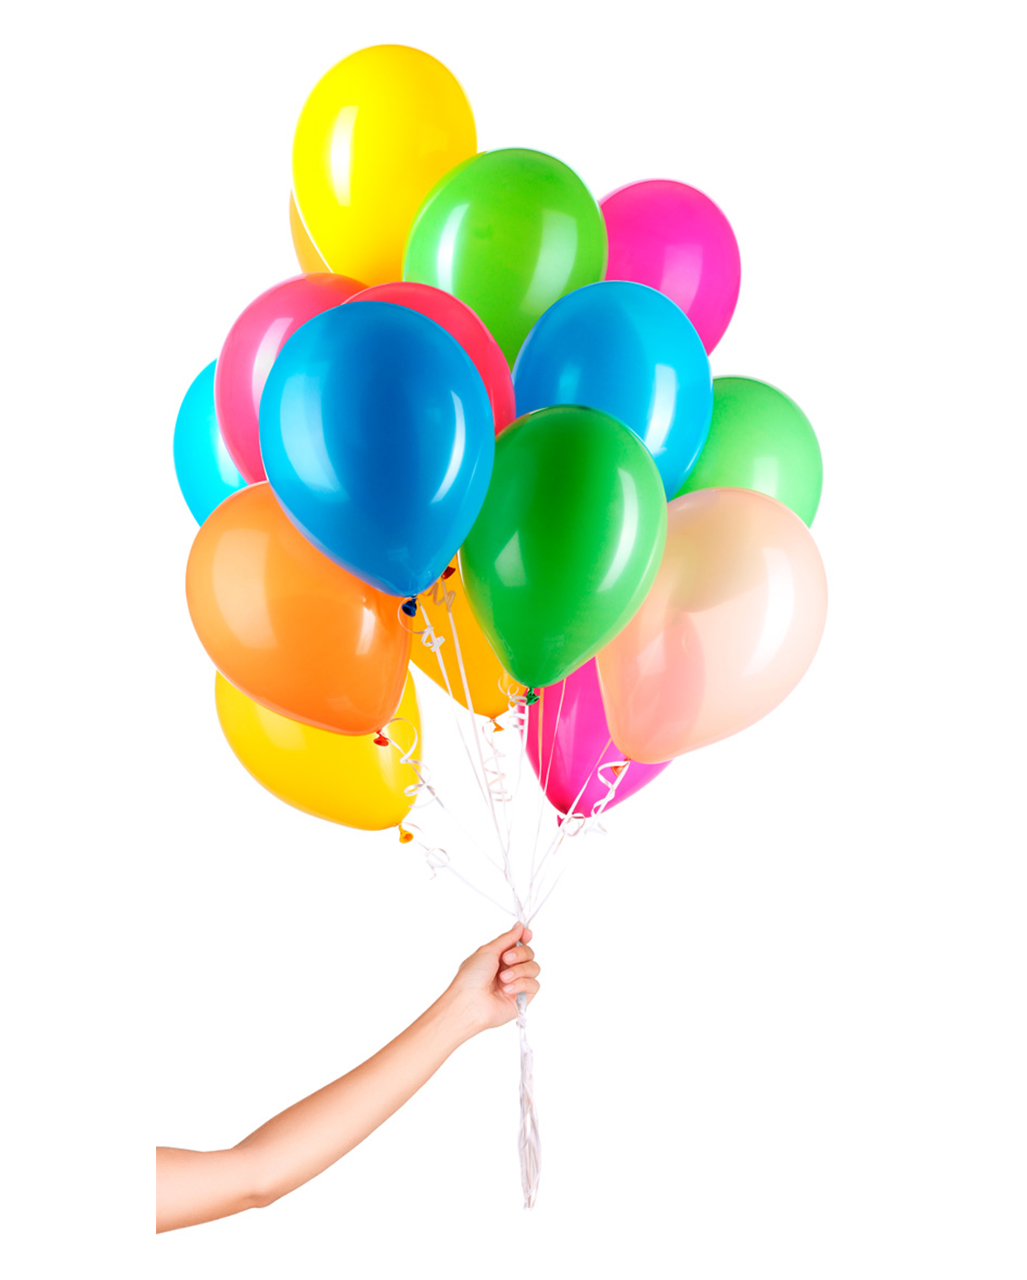 https://inst-1.cdn.shockers.de/hs_cdn/out/pictures/master/product/1/50-latex-ballons-fuer-helium-mit-schnur--heliumballons-bunt-geburtstag--helium-balloons-with-ribbon--29937.jpg